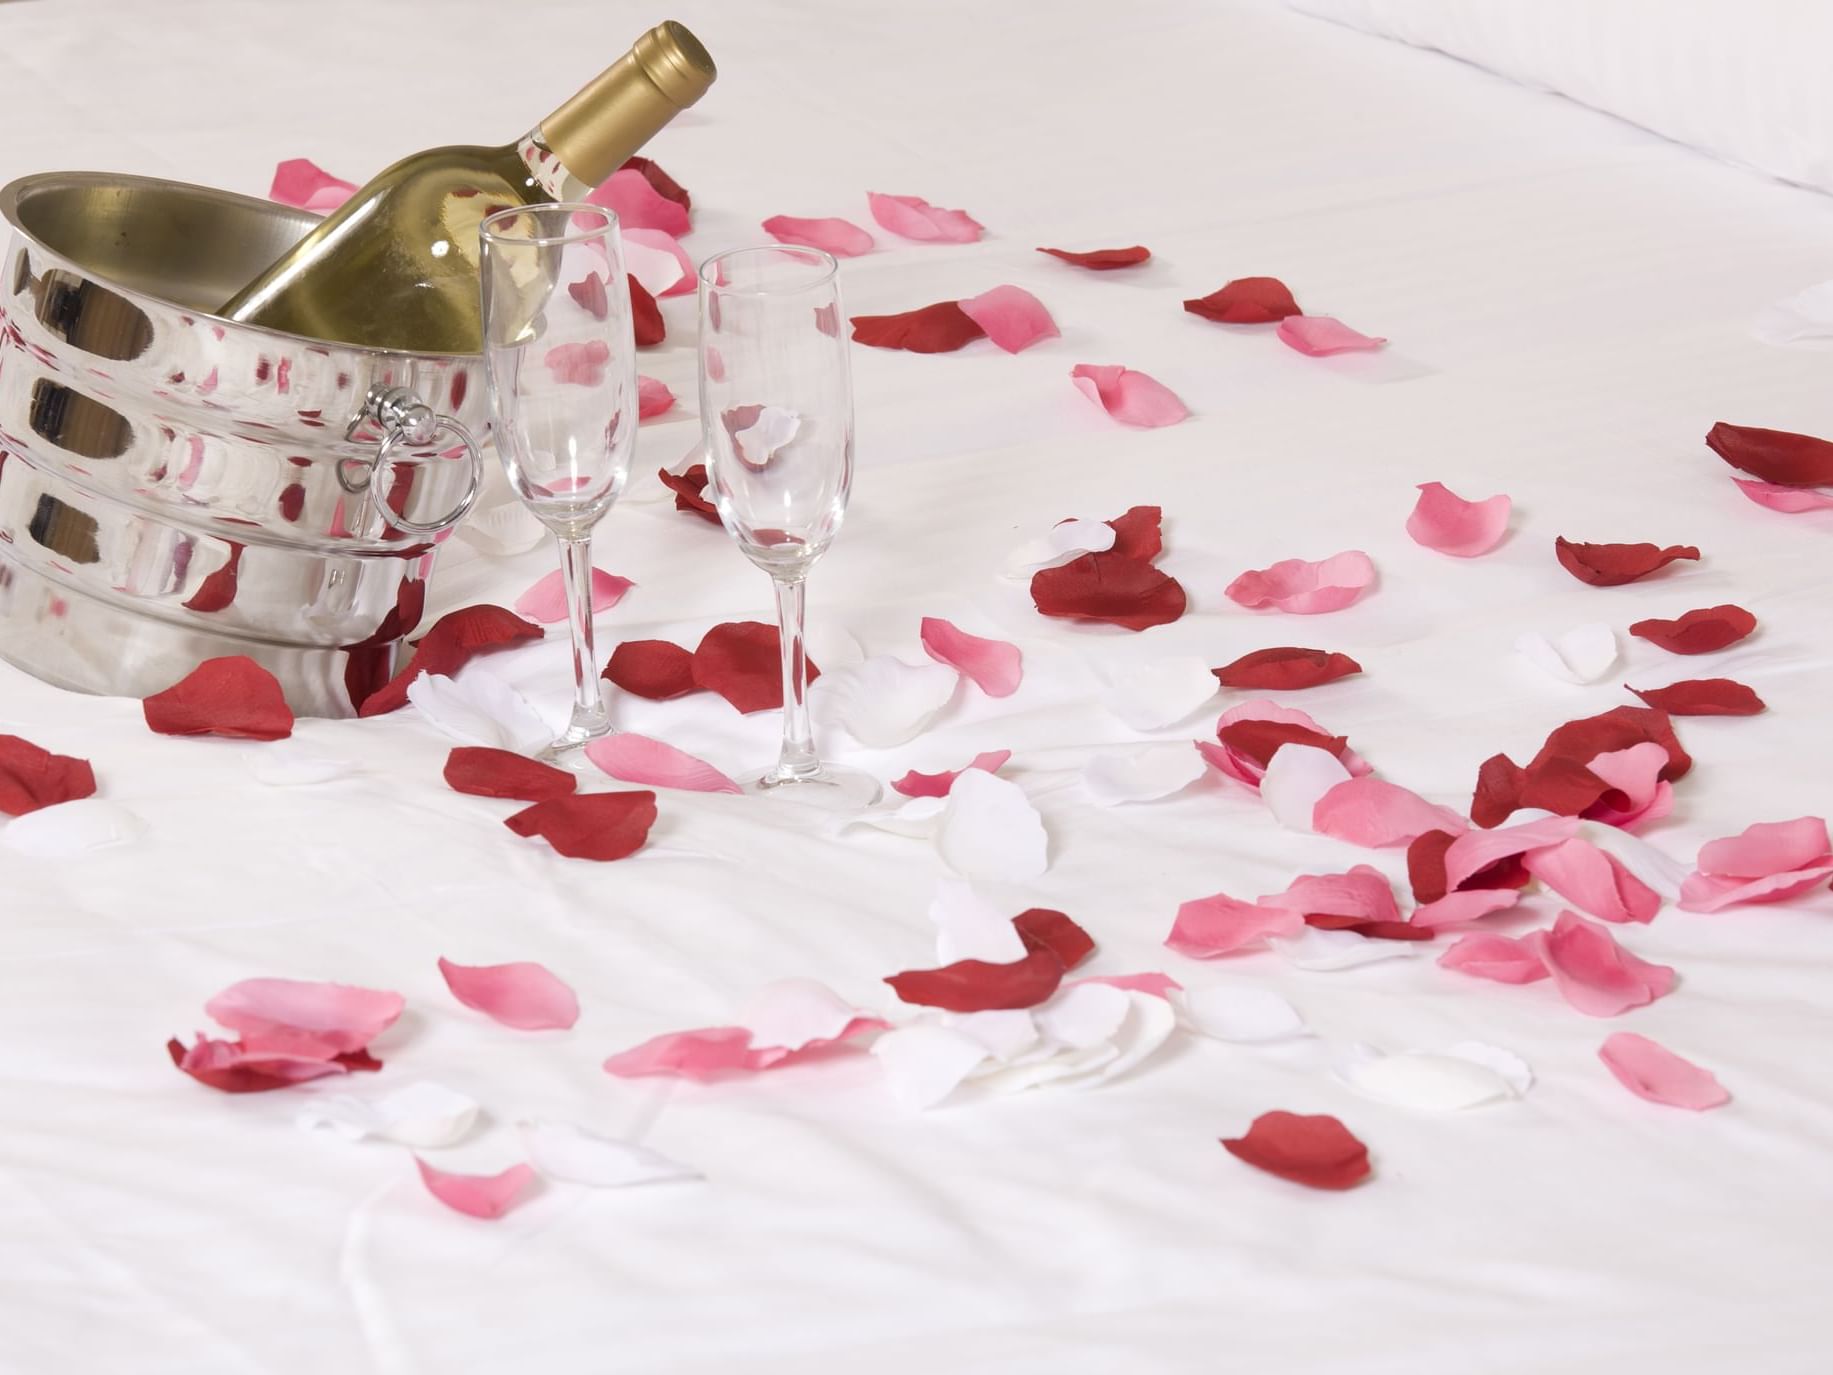 Champaign with glasses & rose petals on bed, The Anaheim Hotel